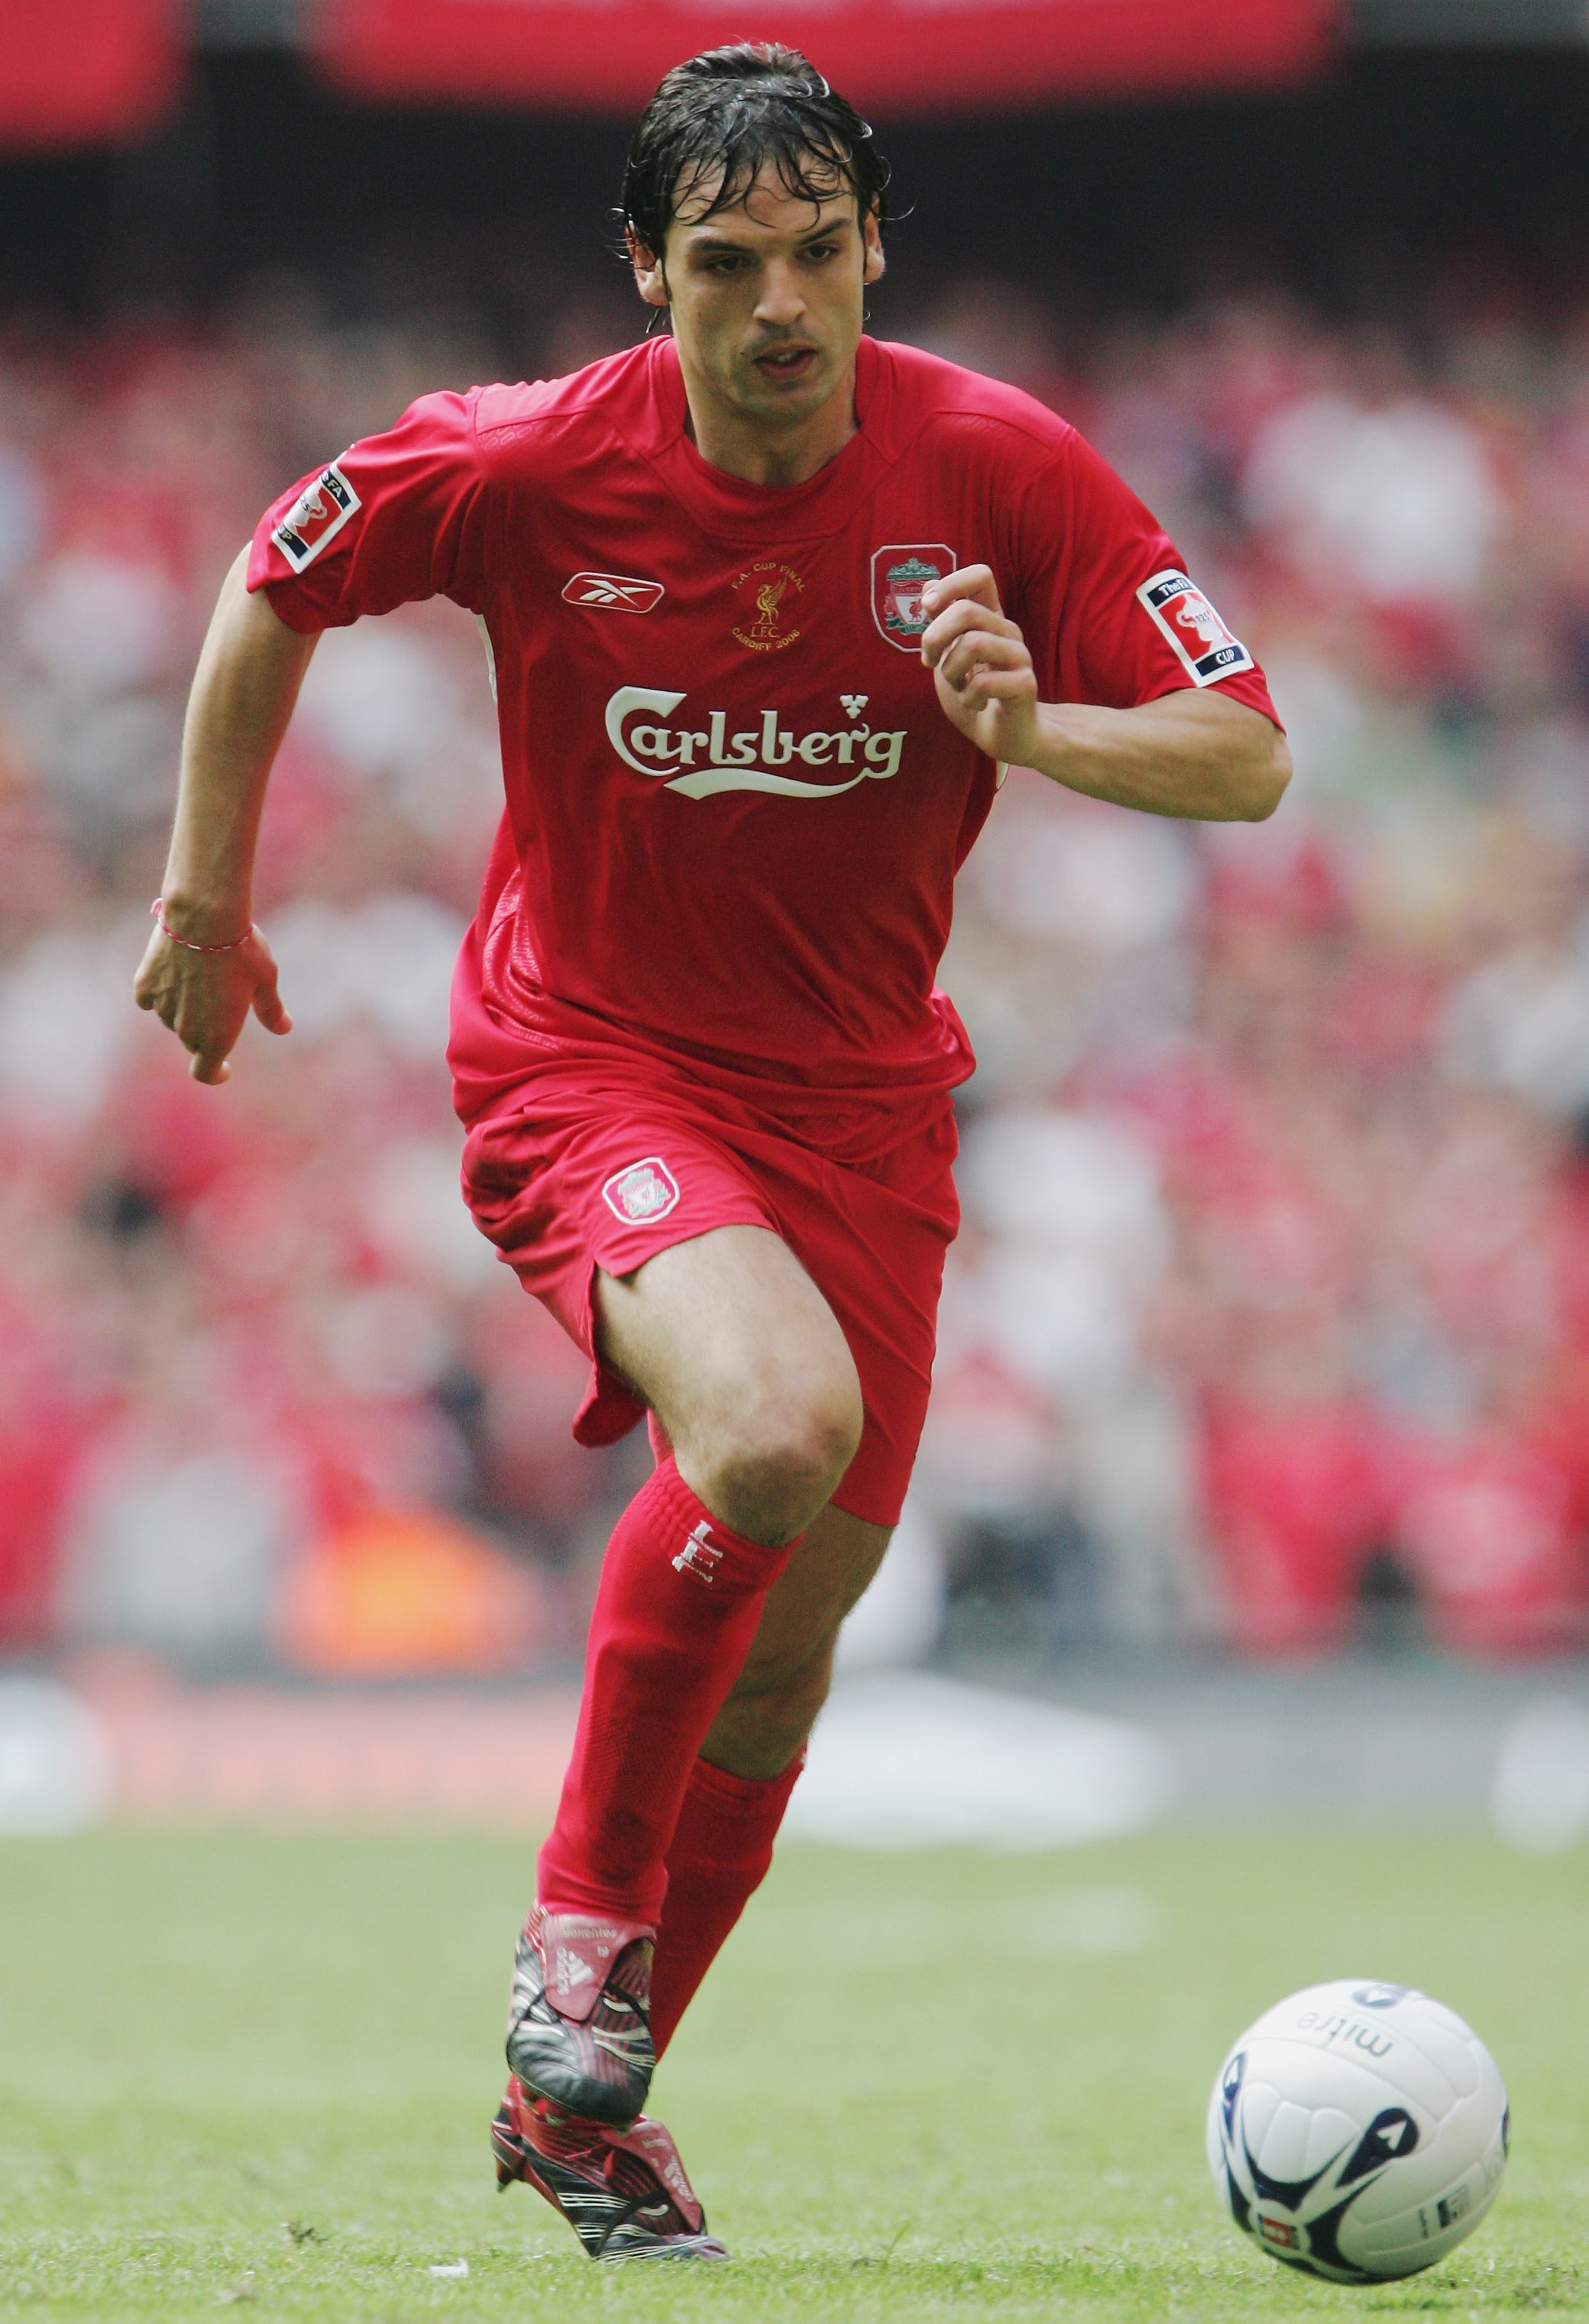 CARDIFF, UNITED KINGDOM - MAY 13:  Fernando Morientes of Liverpool runs with the ball during the FA Cup Final match between Liverpool and West Ham United at the Millennium Stadium on May 13, 2006 in Cardiff, Wales.  (Photo by Phil Cole/Getty Images)